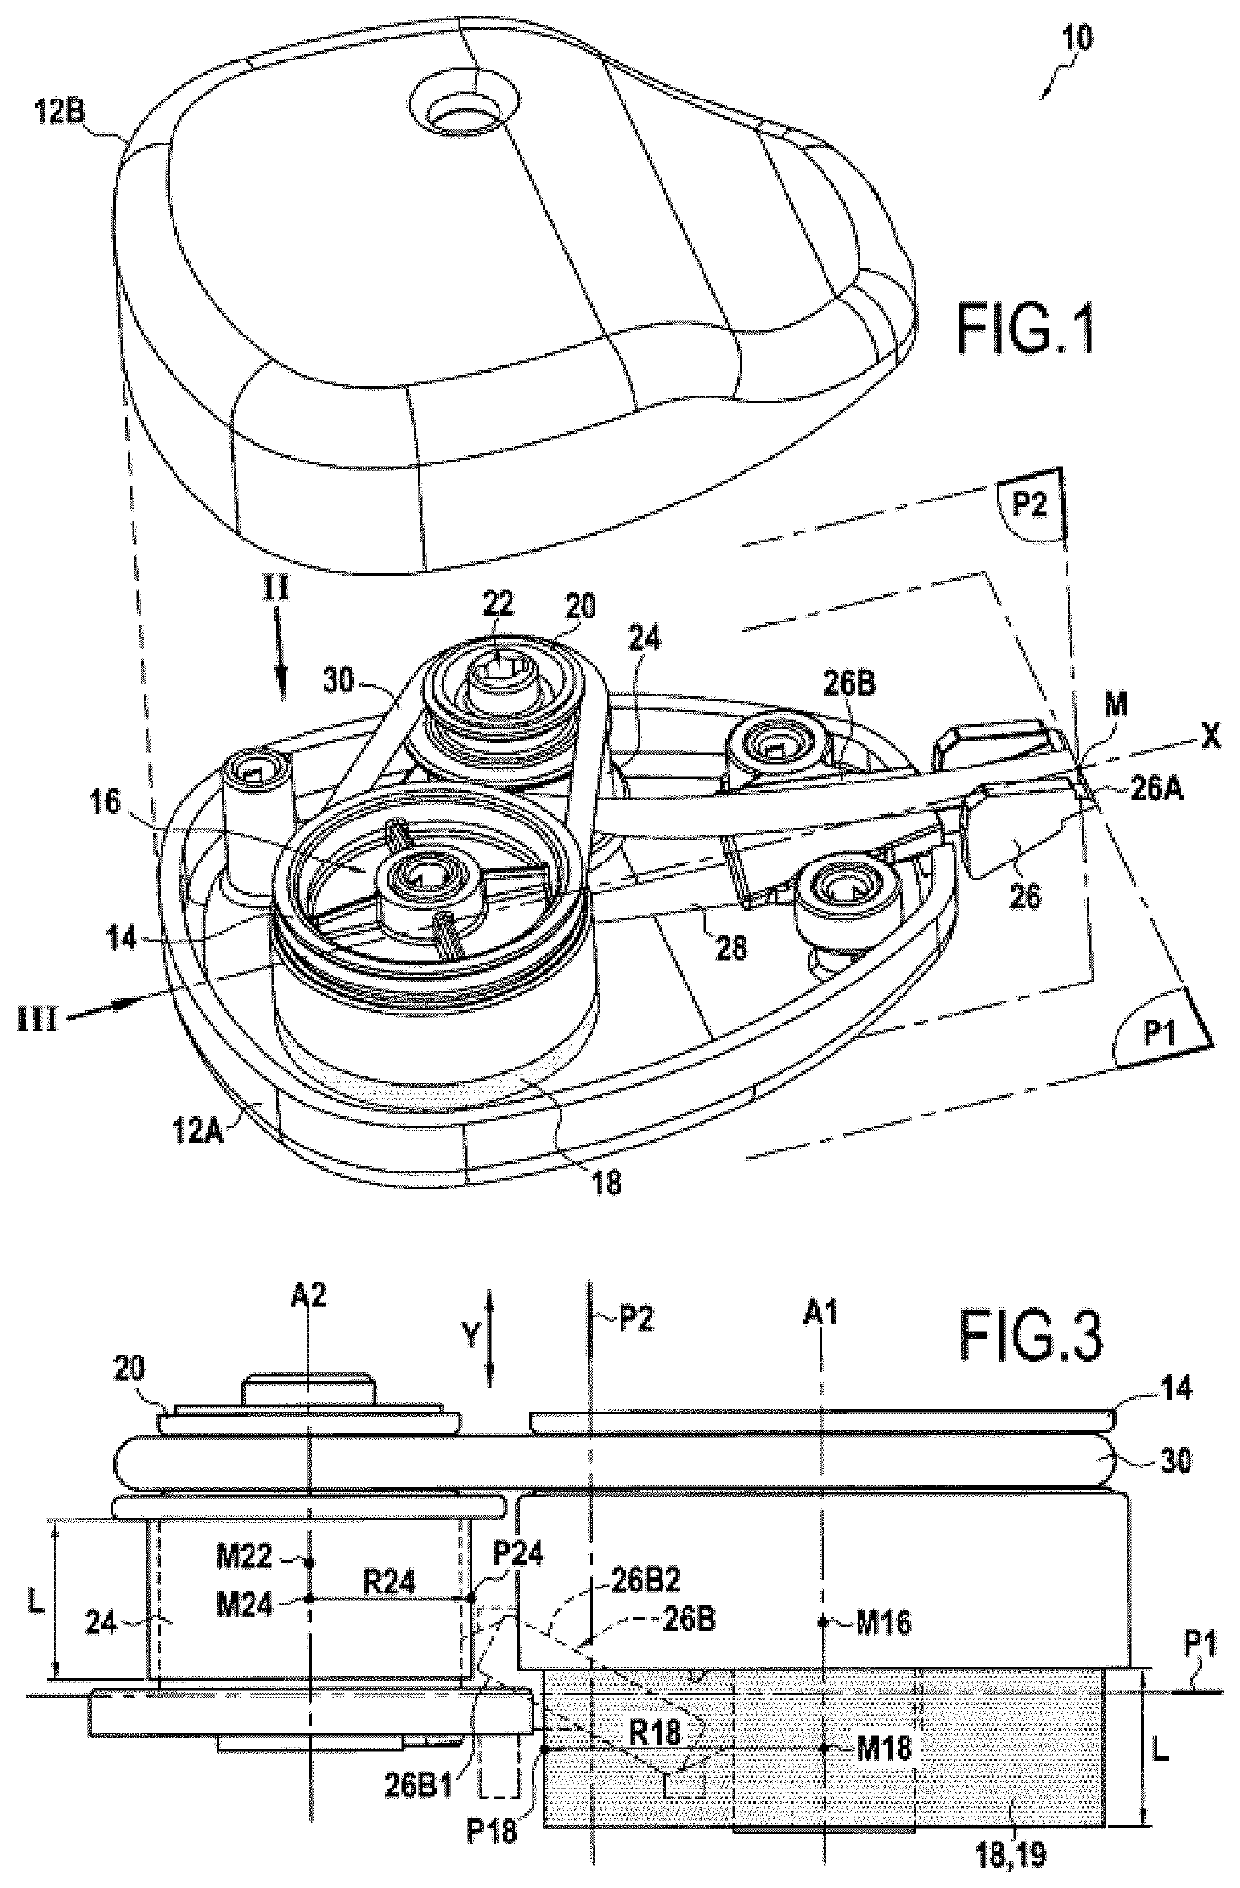 Manual device for applying a coating to a support by means of tape